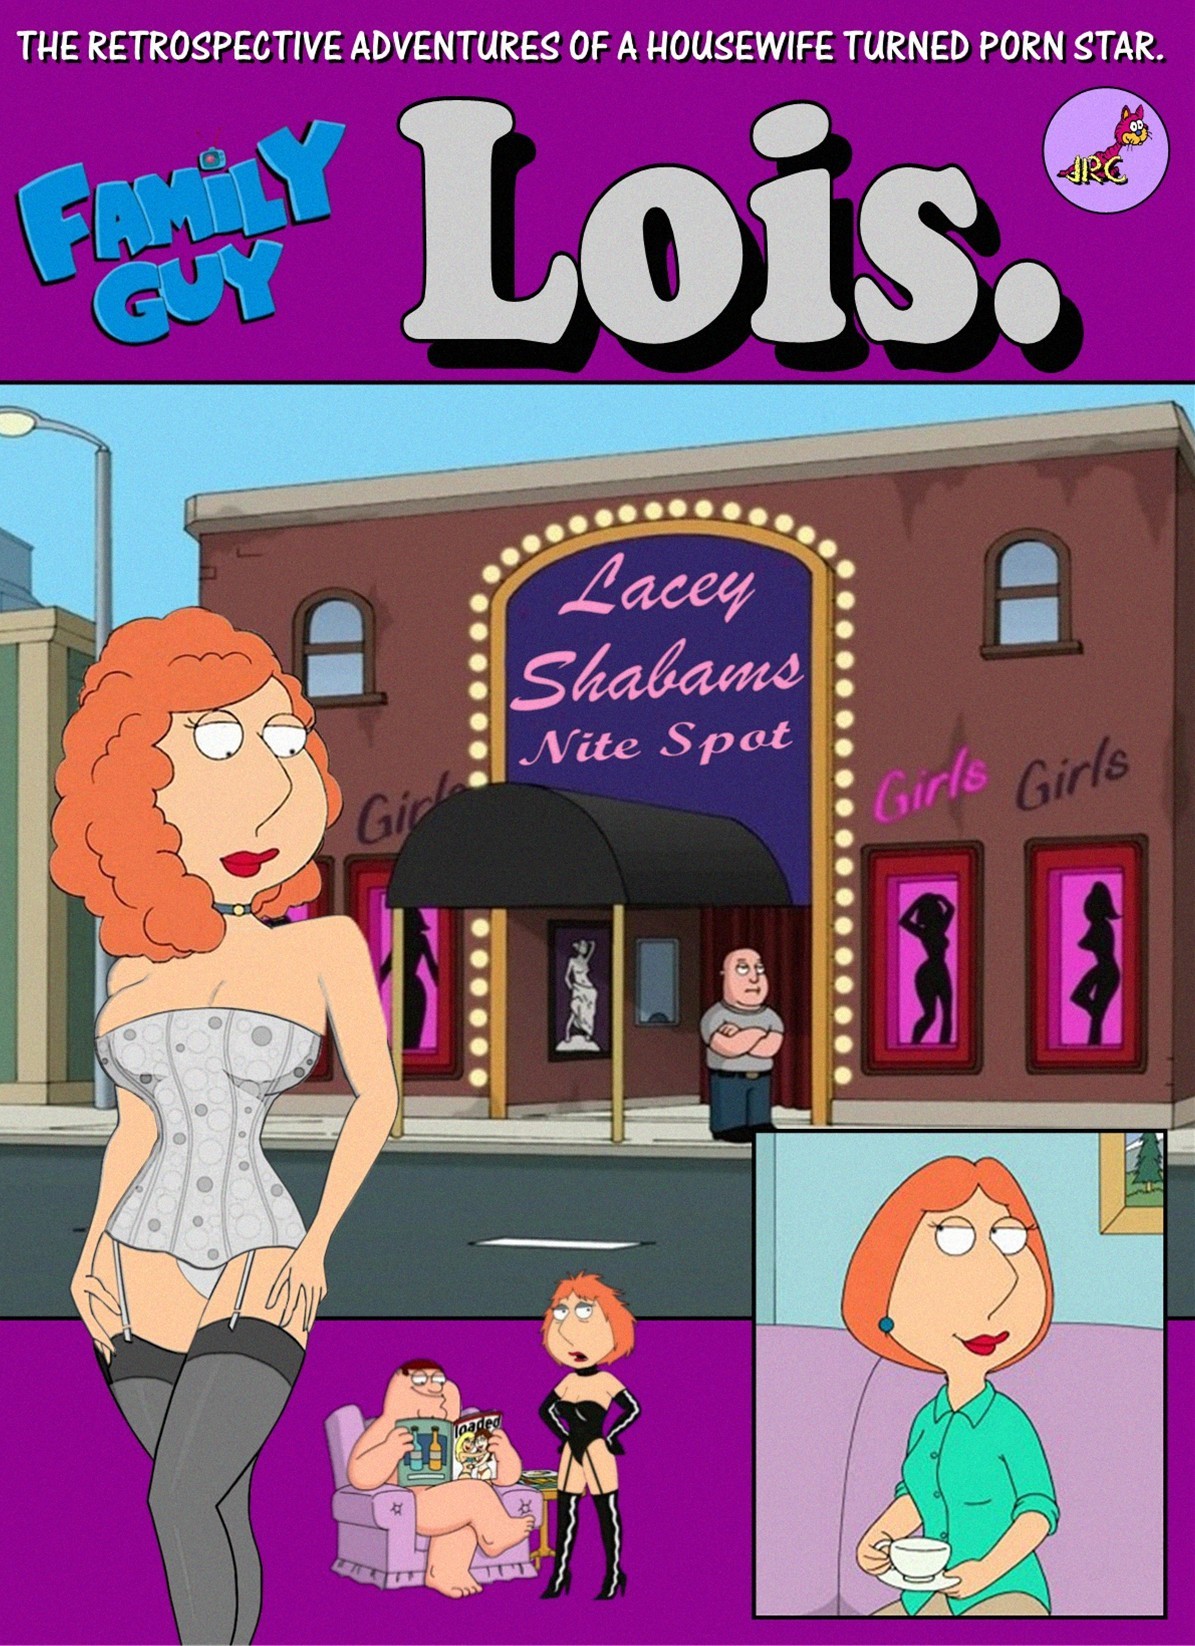 Family Guy — JRC — The Retrospective Adventures Of A Housewife Turned Porno Star — Lois image image